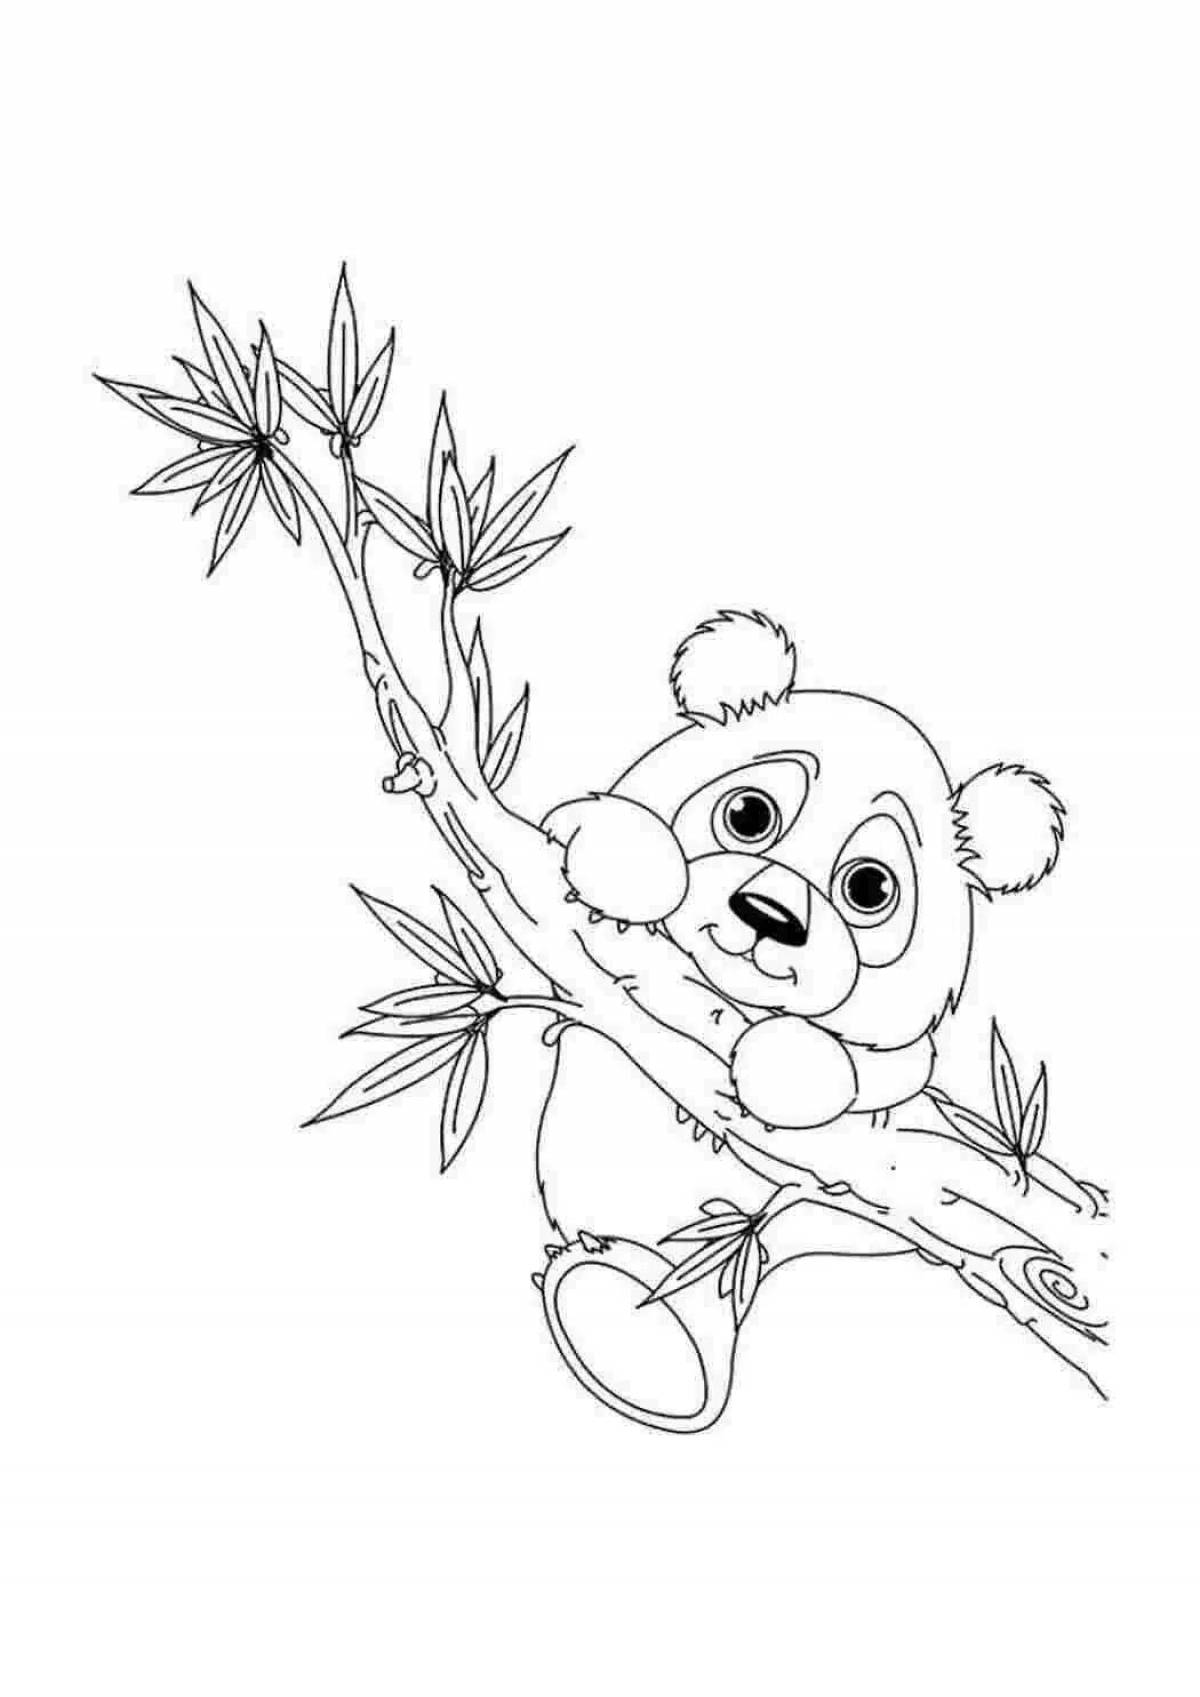 Colourful panda coloring pages for girls